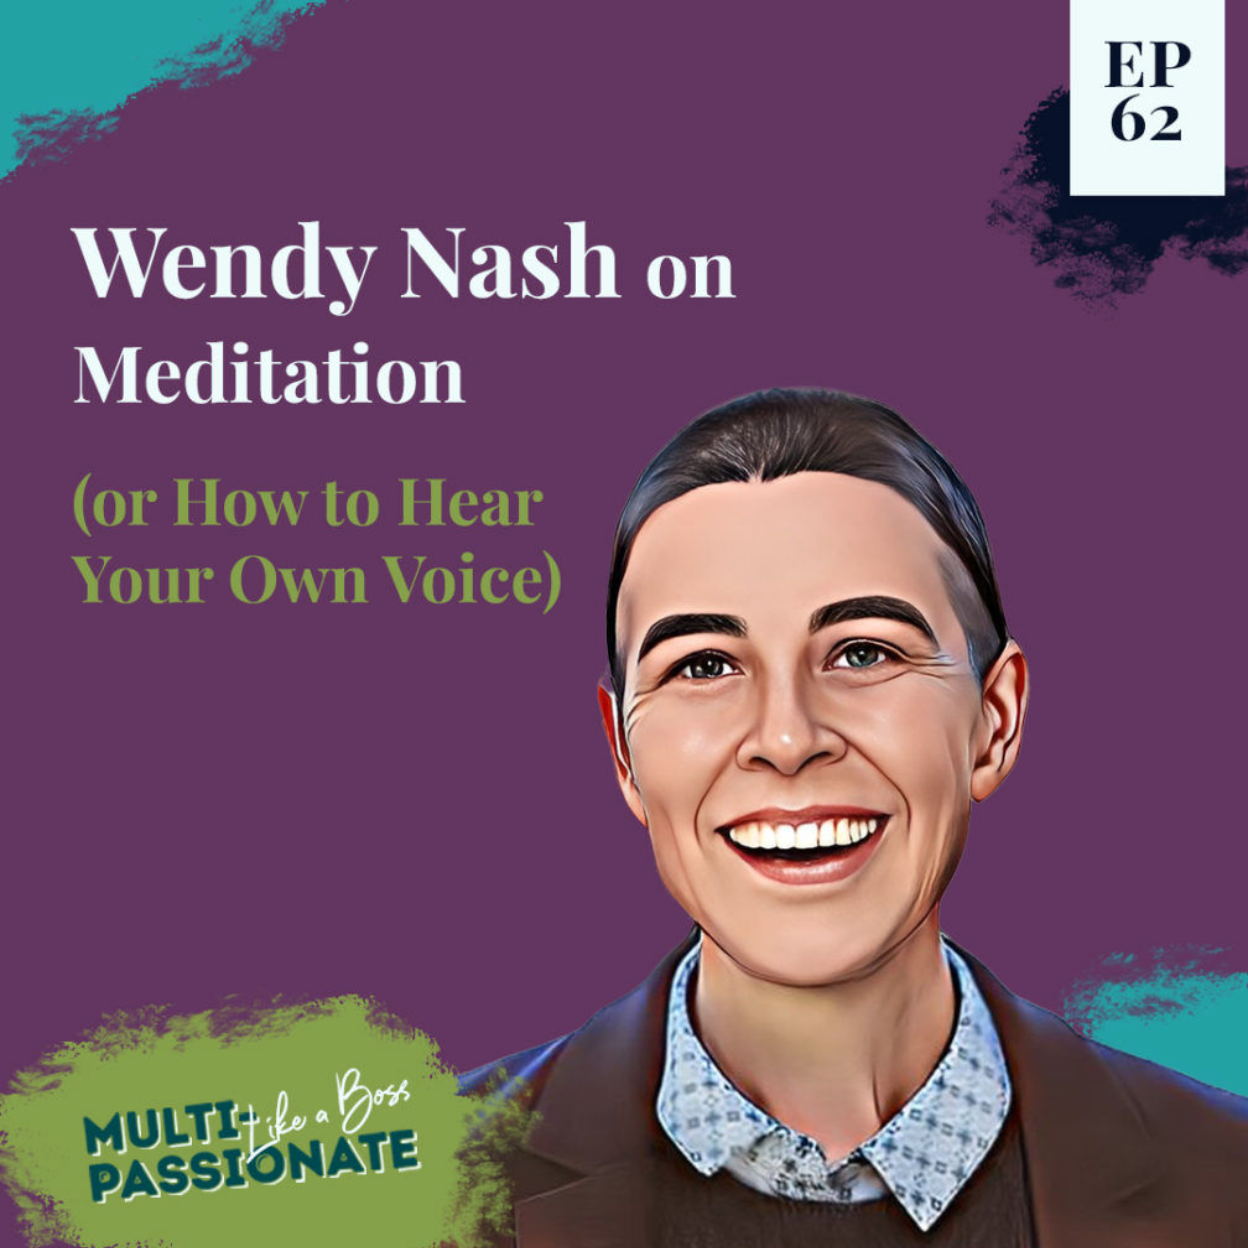 Caucasian woman with a closely shave head smiling against a purple background next to the title: Wendy Nash on Meditation (or How to Hear Your Own Voice)